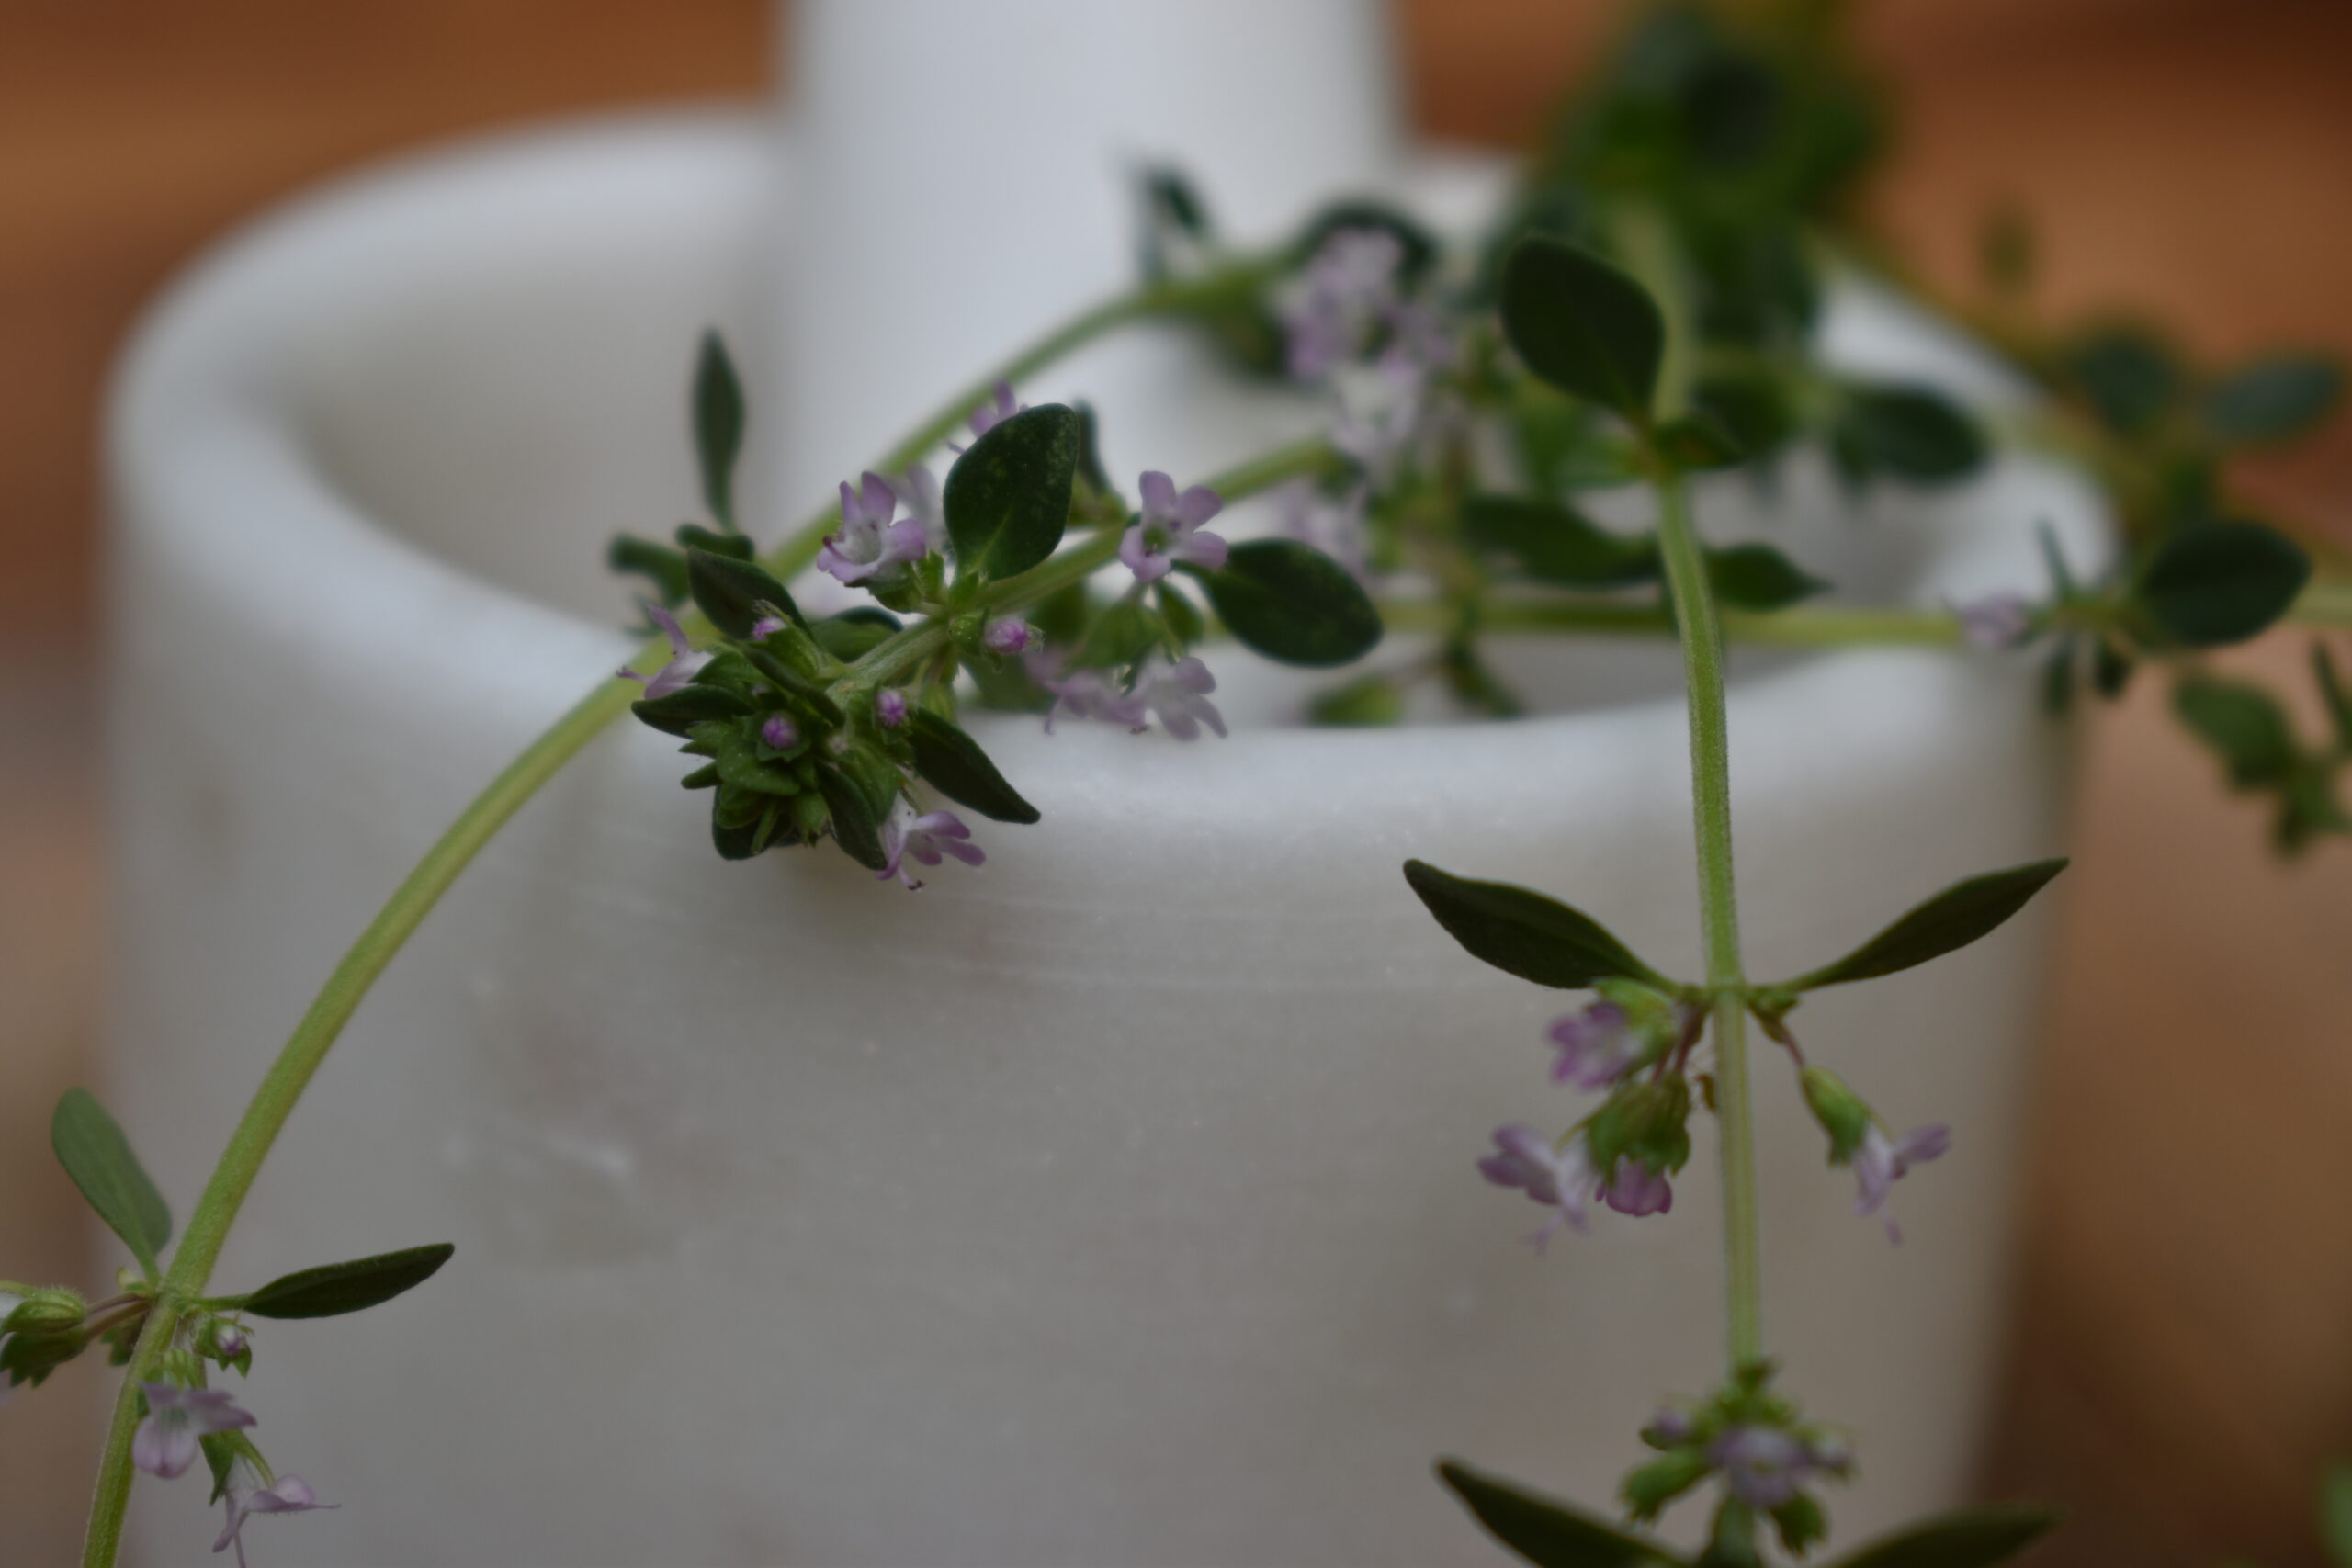 thyme in a mortar and pestle for a garlic infused honey recipe